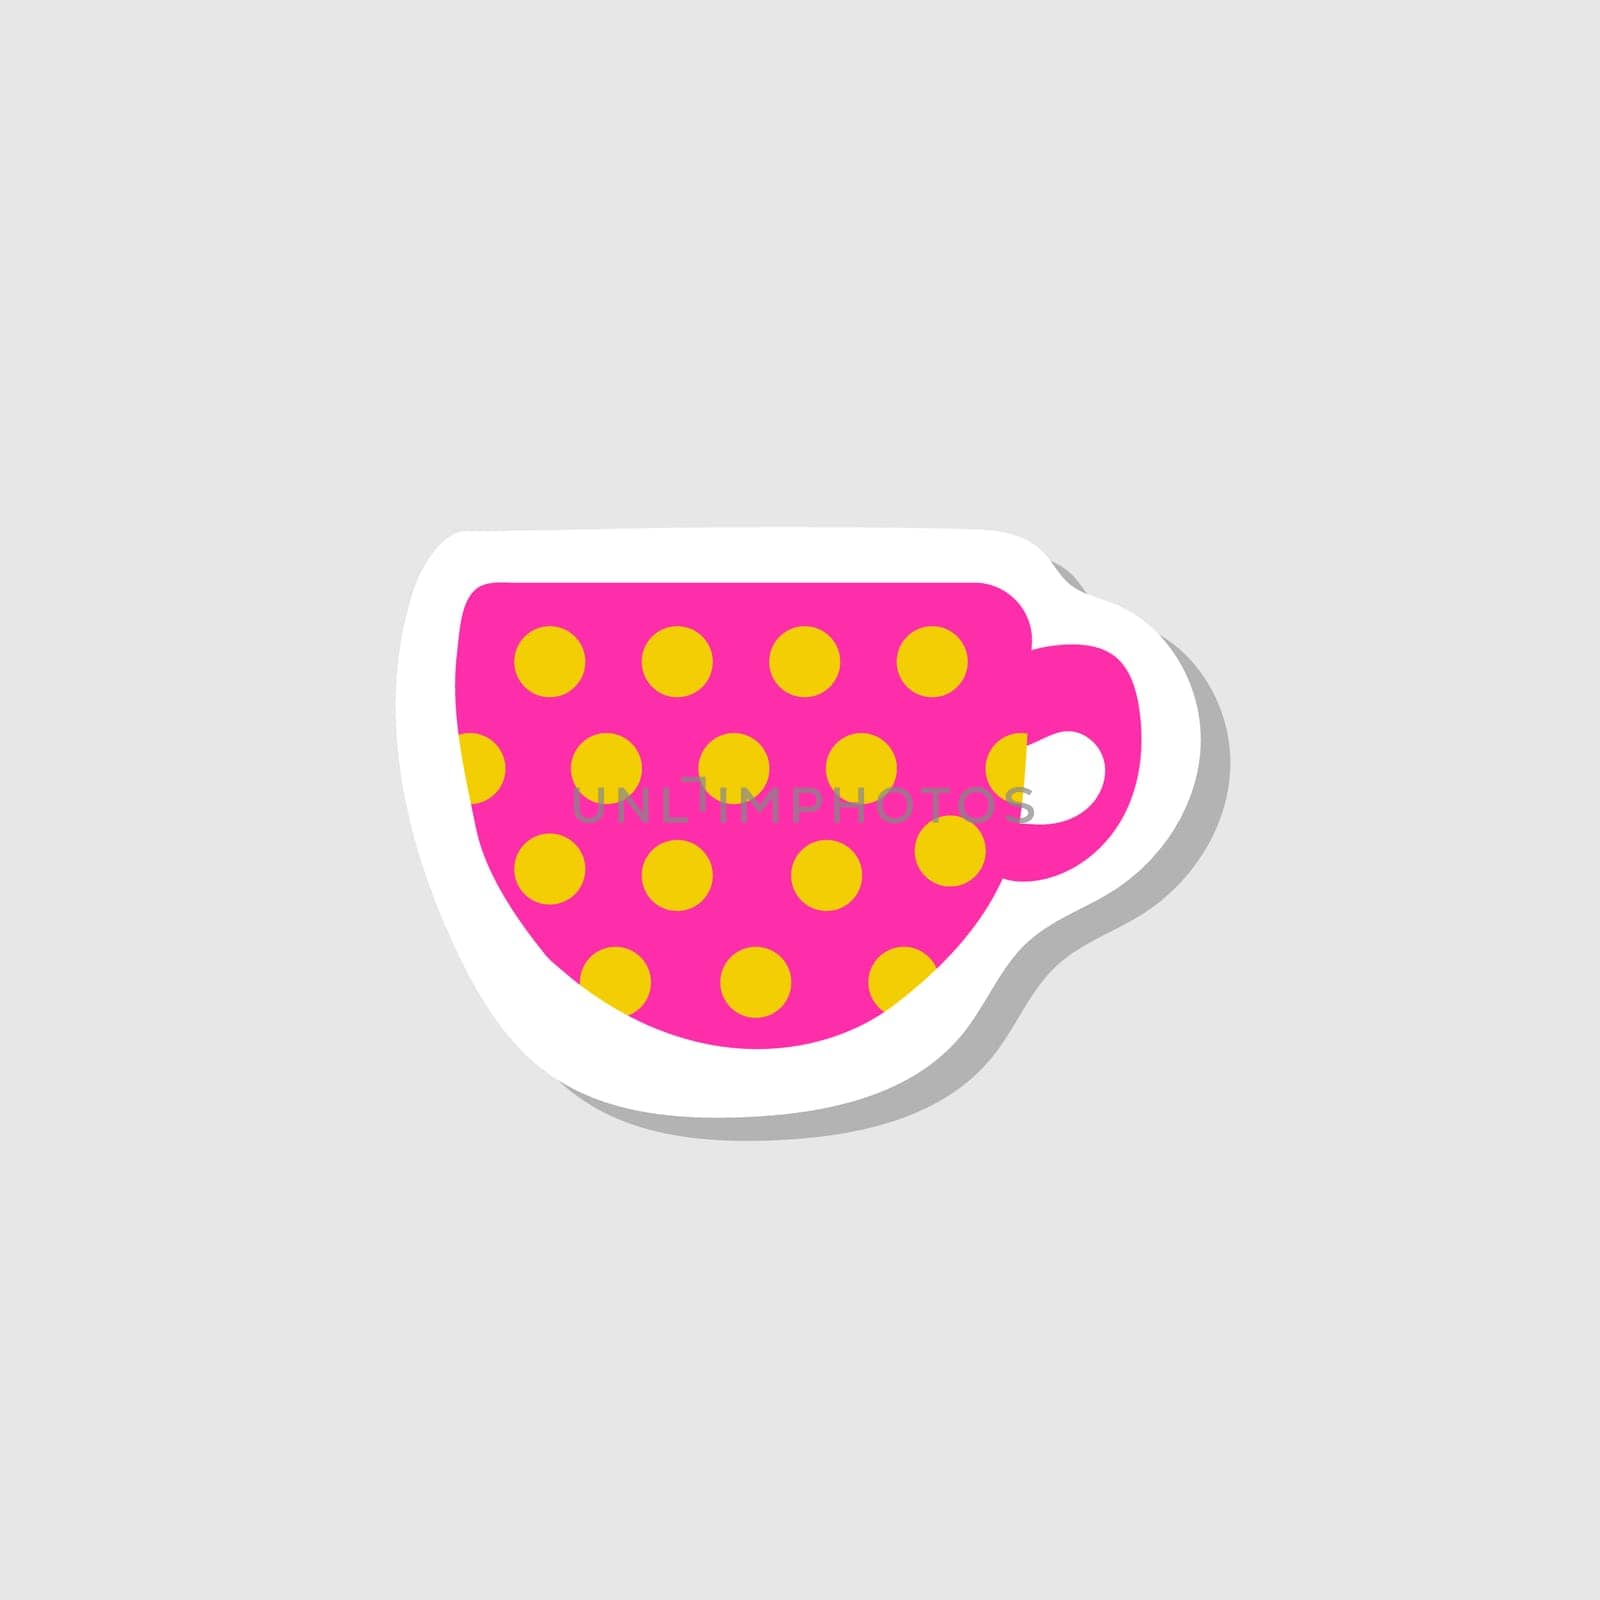 Cute cup. Pink dotted mug - modern cartoon style illustration for graphic design by natali_brill